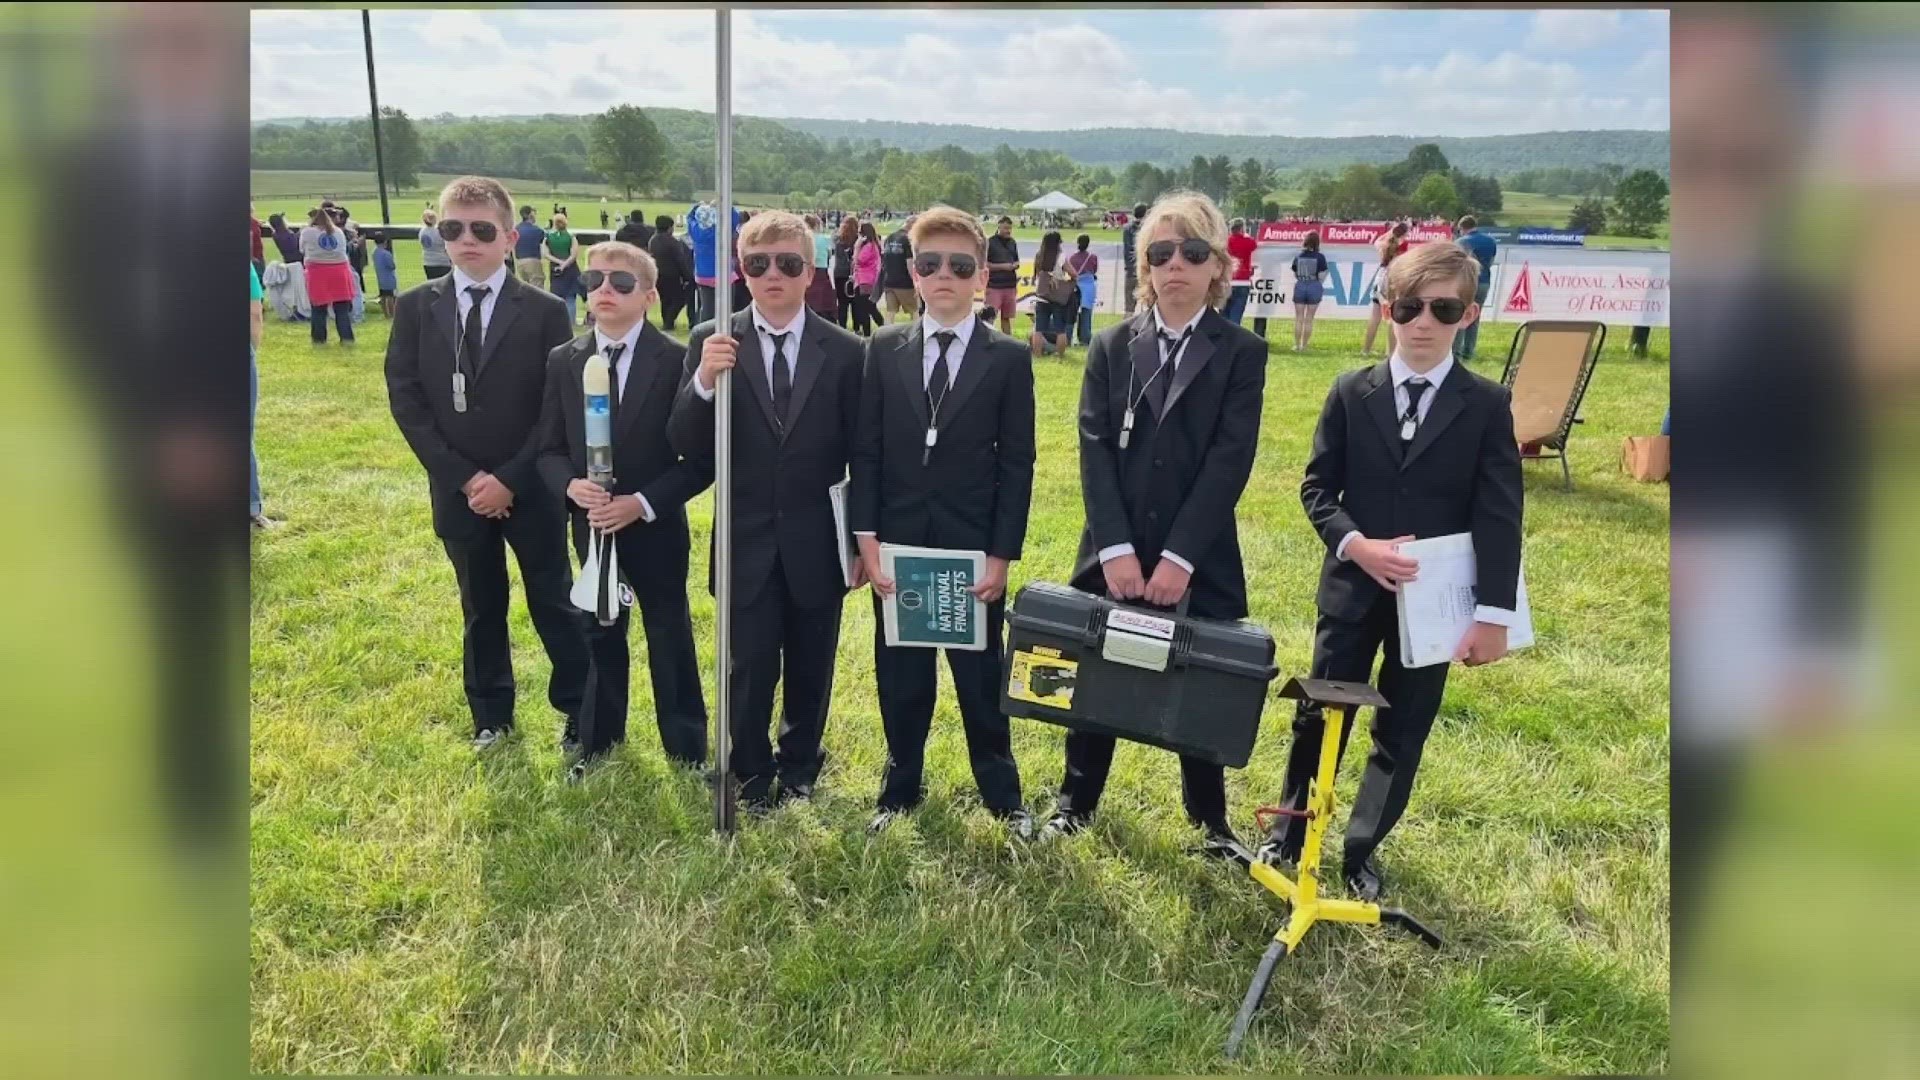 The group from Anthony Wayne Middle School was one of the youngest teams in the national rocketry competition and placed higher than teams of high school students.